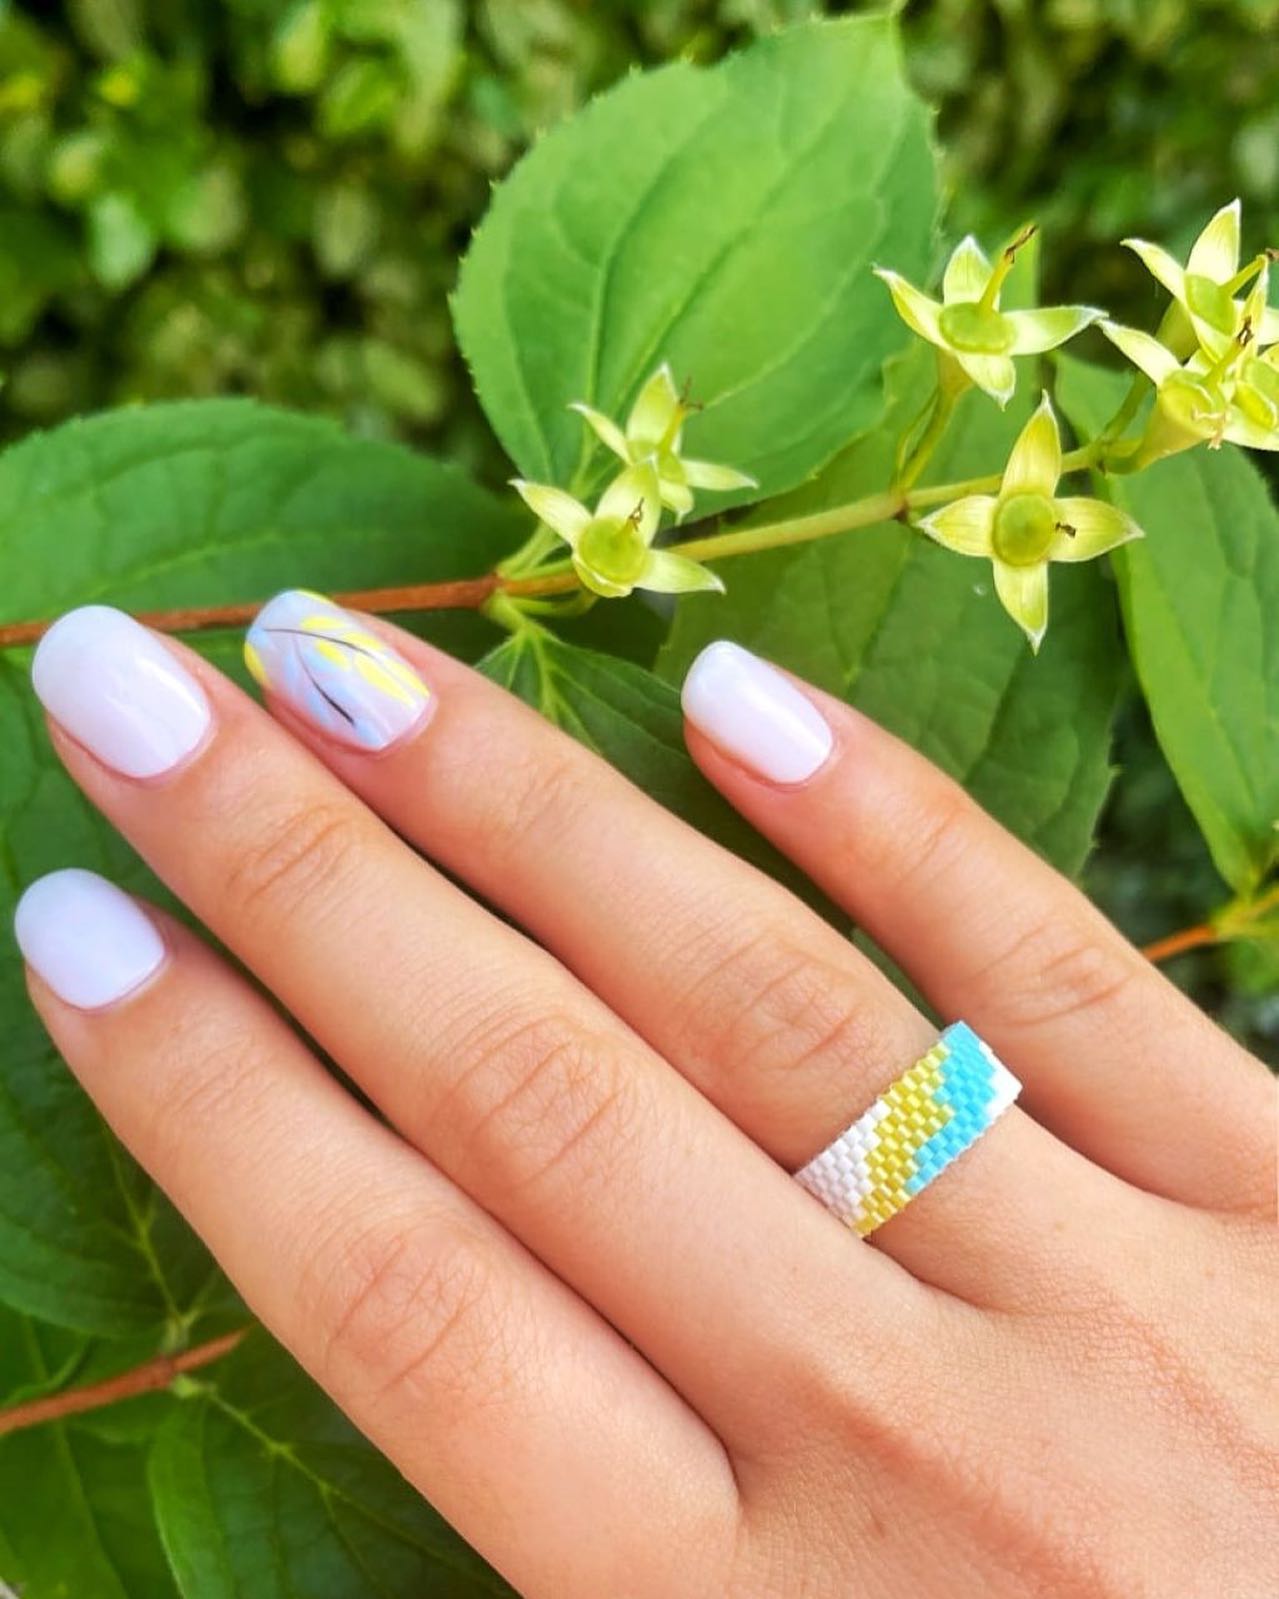 Tender & Beautiful handmade ring in a color of Ukrainian flag 🇺🇦. Made by one talented Ukrainian artist ☺️. 

 #madeinswitzerland #madewithlove #creativethursday #handmadering #originalrings #supportukrainianartists #supportsmallbusinesses #supportartists #originalgifts #madewithlove #madebyhands #becreative #fashionrings #fashionring #stylishring #cooljewelry #handmadejewelry #tobuy #switzerland #makeyourlook #nyon #rings #superring #українськідизайнери #українське #українцівшвейцарії #supporttalents 

Follow 
@handcrafts.ch 
@handcrafts.ch 
@handcrafts.ch